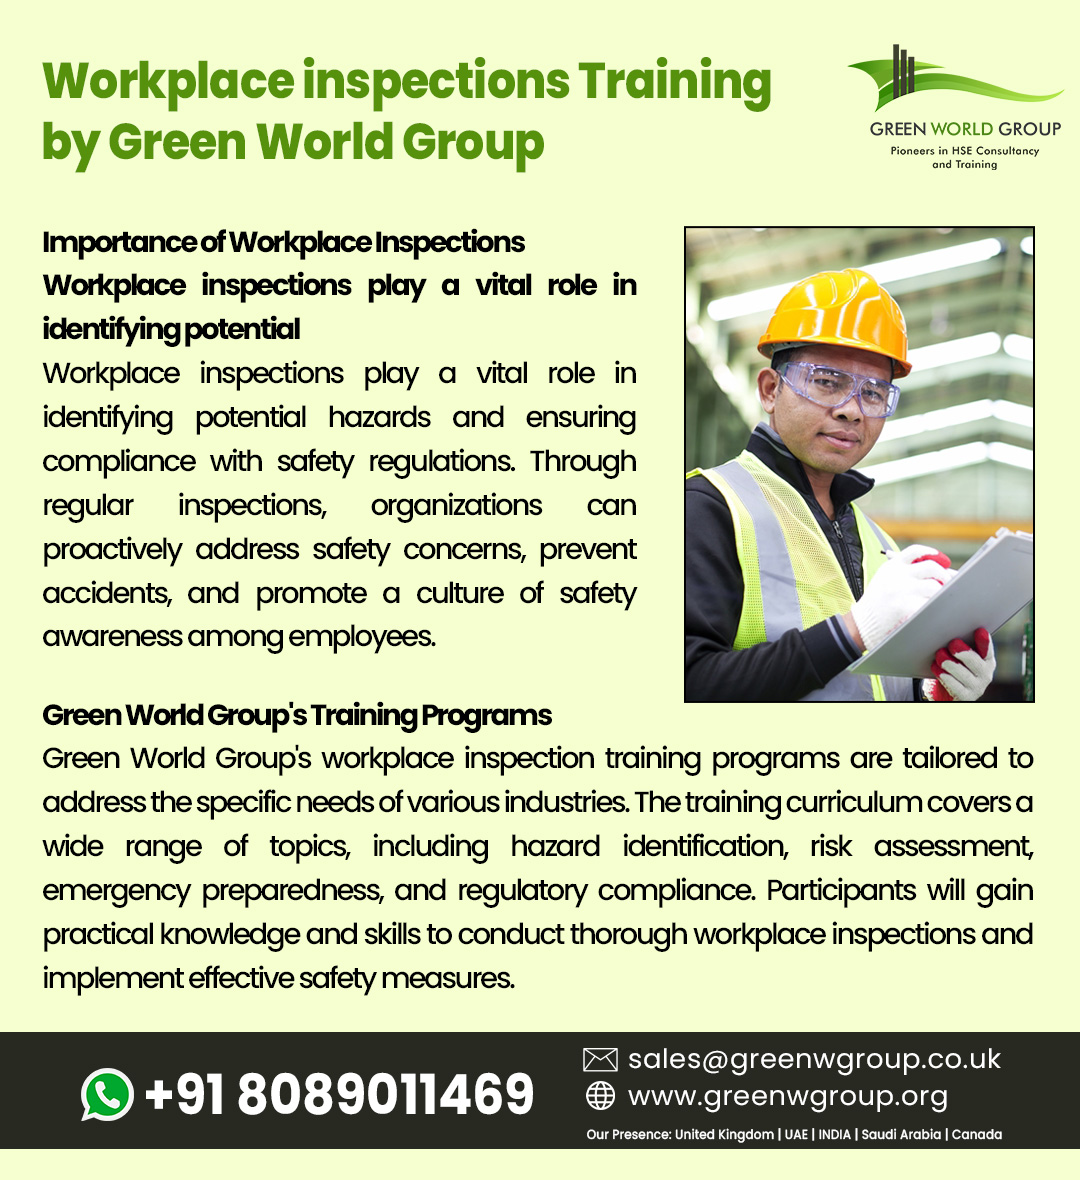 Visit Us : greenwgroup.co.uk  
Contact Us : +918089011469
Email : aswathi.s@greenwgroup.com

#WorkplaceInspections,#SafetyTraining,#GreenWorldGroup,#InspectionSkills,#WorkplaceSafety,#SafetyFirst,#OccupationalSafety